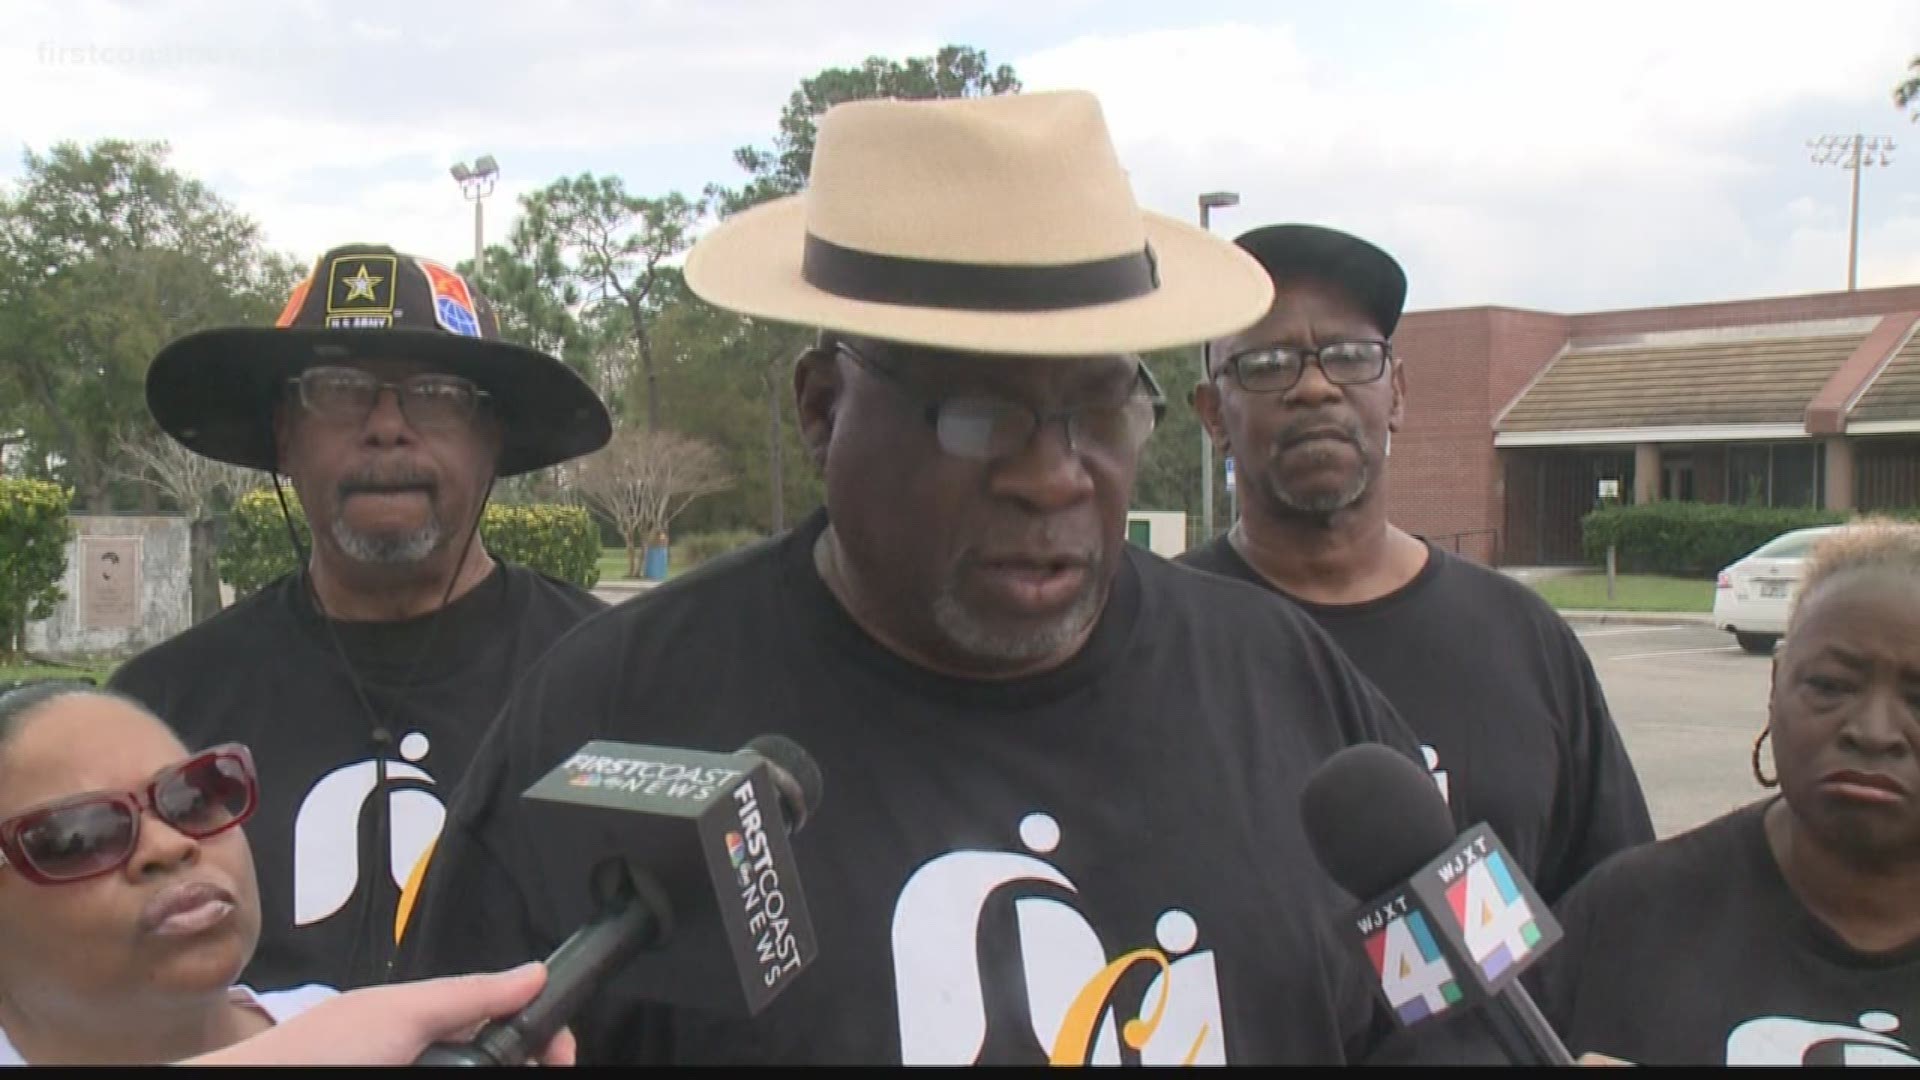 The ceasefire extends from 12 p.m. Saturday through March 1, according to Ben Frazier, president of the Northside Coalition of Jacksonville.